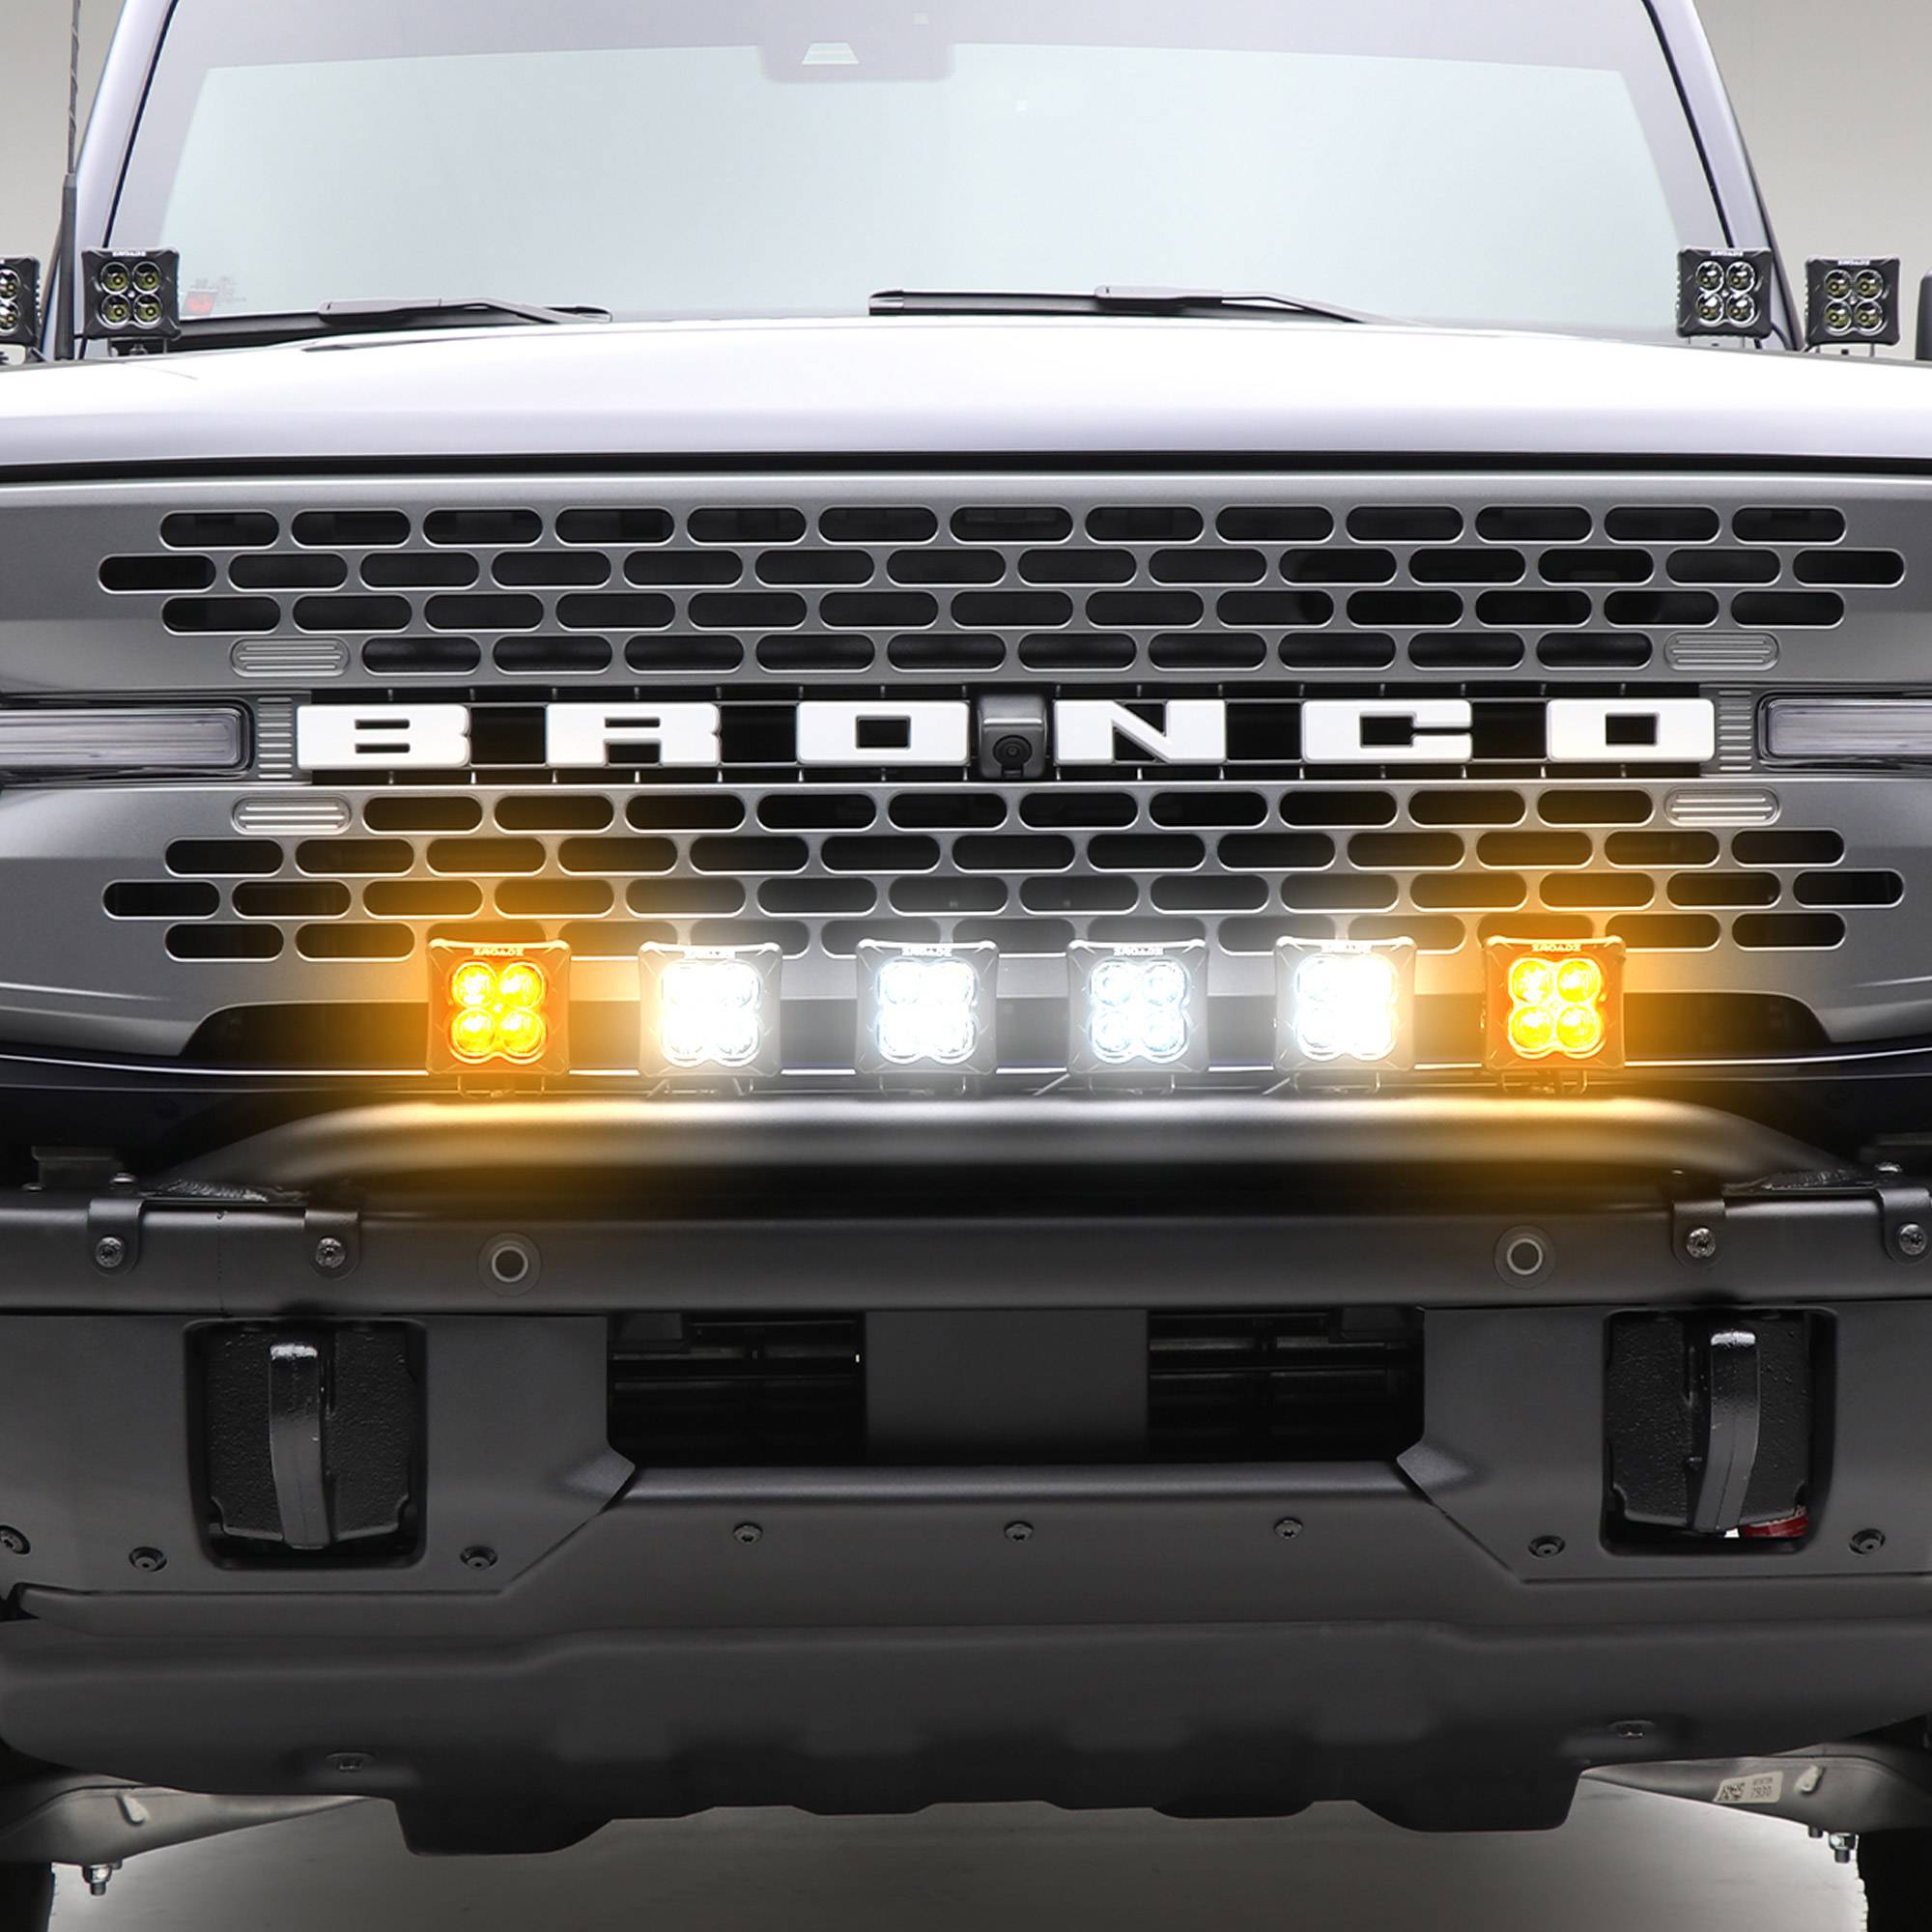 ZROADZ OFF ROAD PRODUCTS - 2021-2023 Ford Bronco Front Bumper Top LED KIT, Includes (4) 3 inch ZROADZ White and (2) 3 inch Amber LED Light Pods - Part # Z325431-KITAW